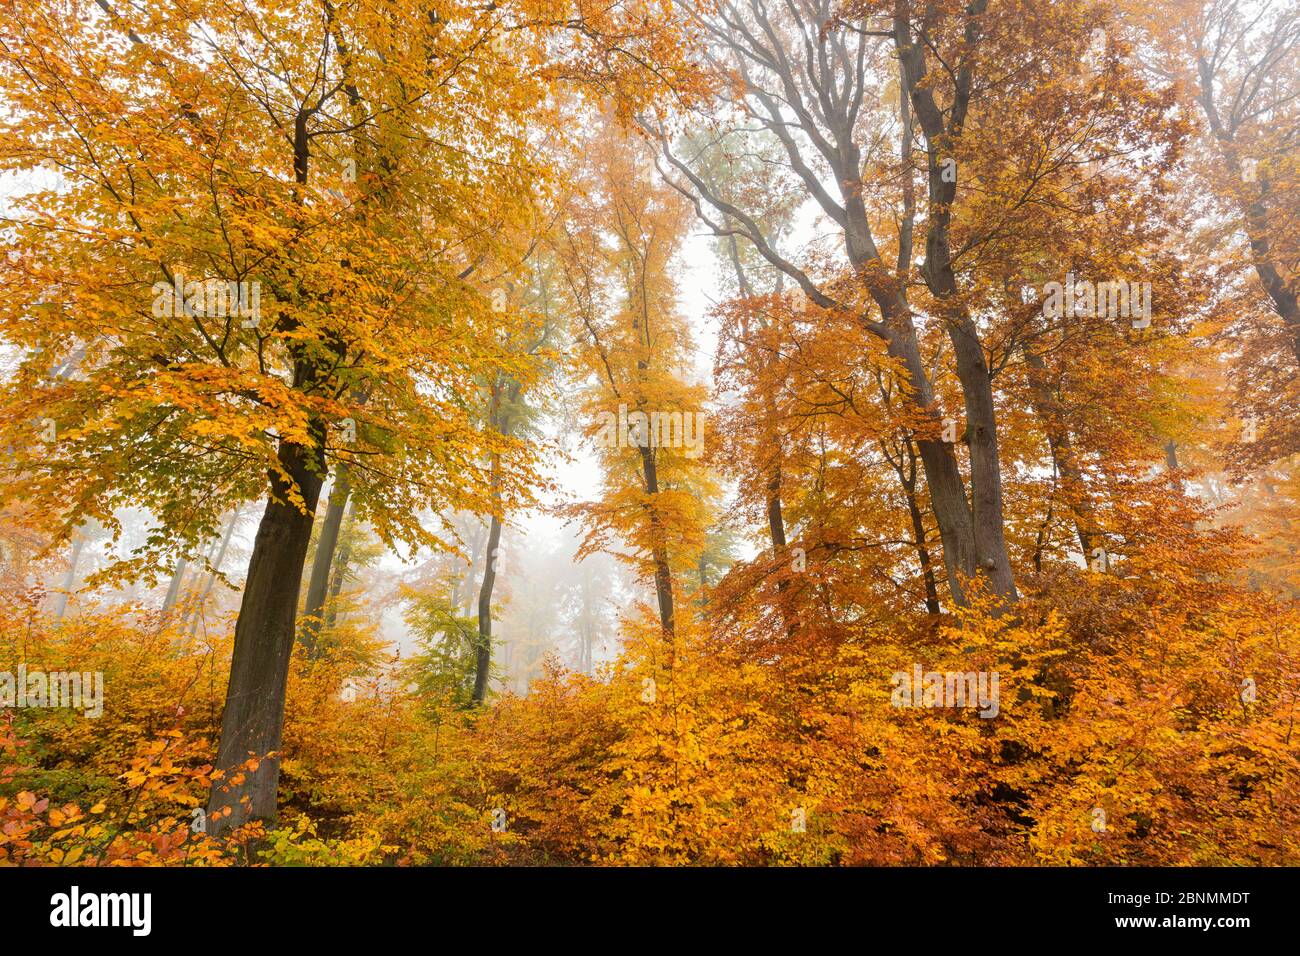 Beech (Fagus sylvatica) forest in autumn, Germany, November. Stock Photo